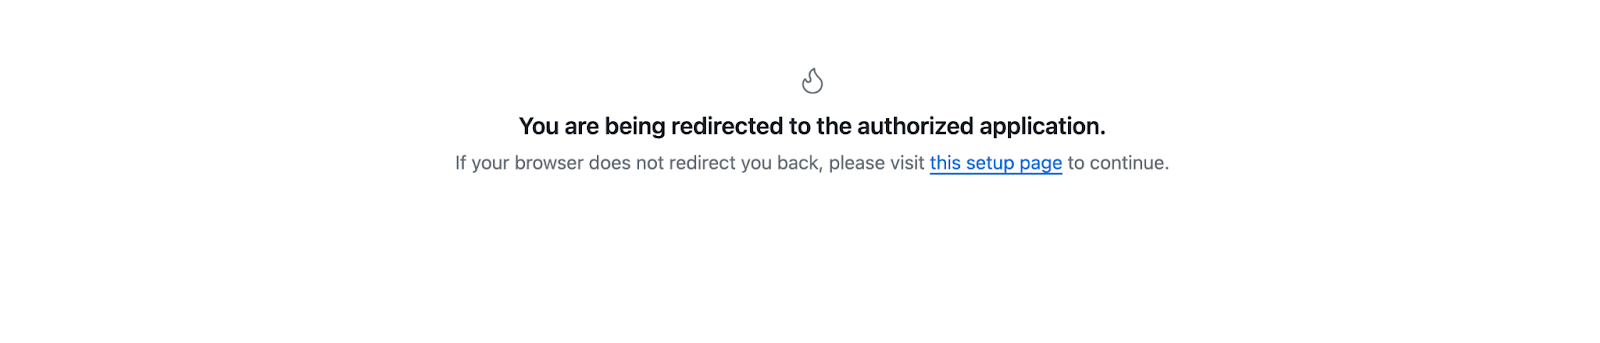 Successful authorization for DeployBot connection